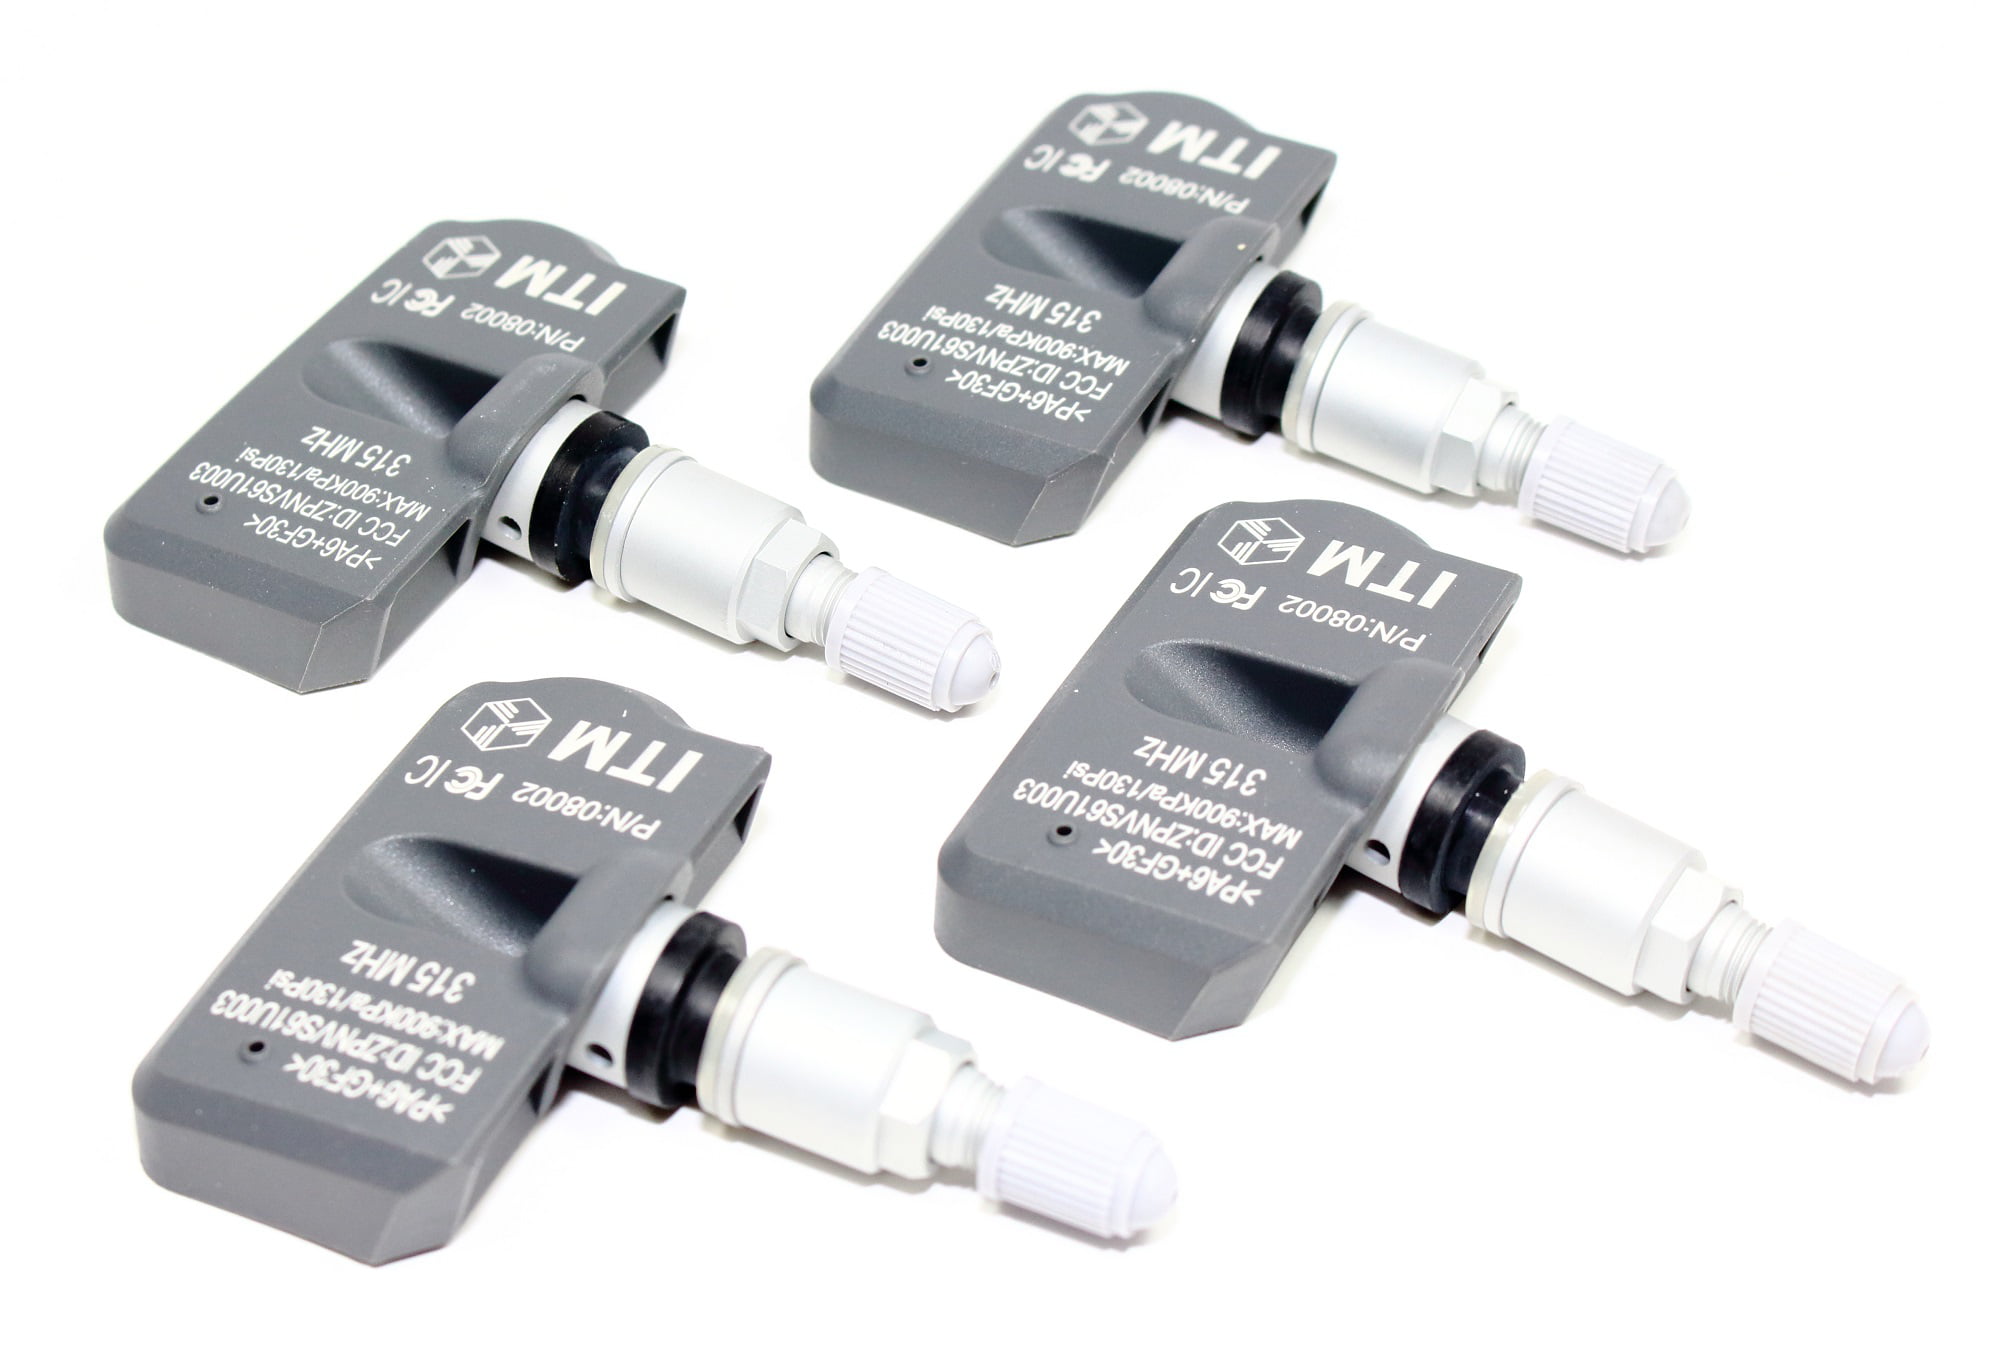 ITM Set of 4 315mhz TPMS Tire Pressure Sensors 2010 2011 2012 2013 Toyota Corolla All Models Replacement 